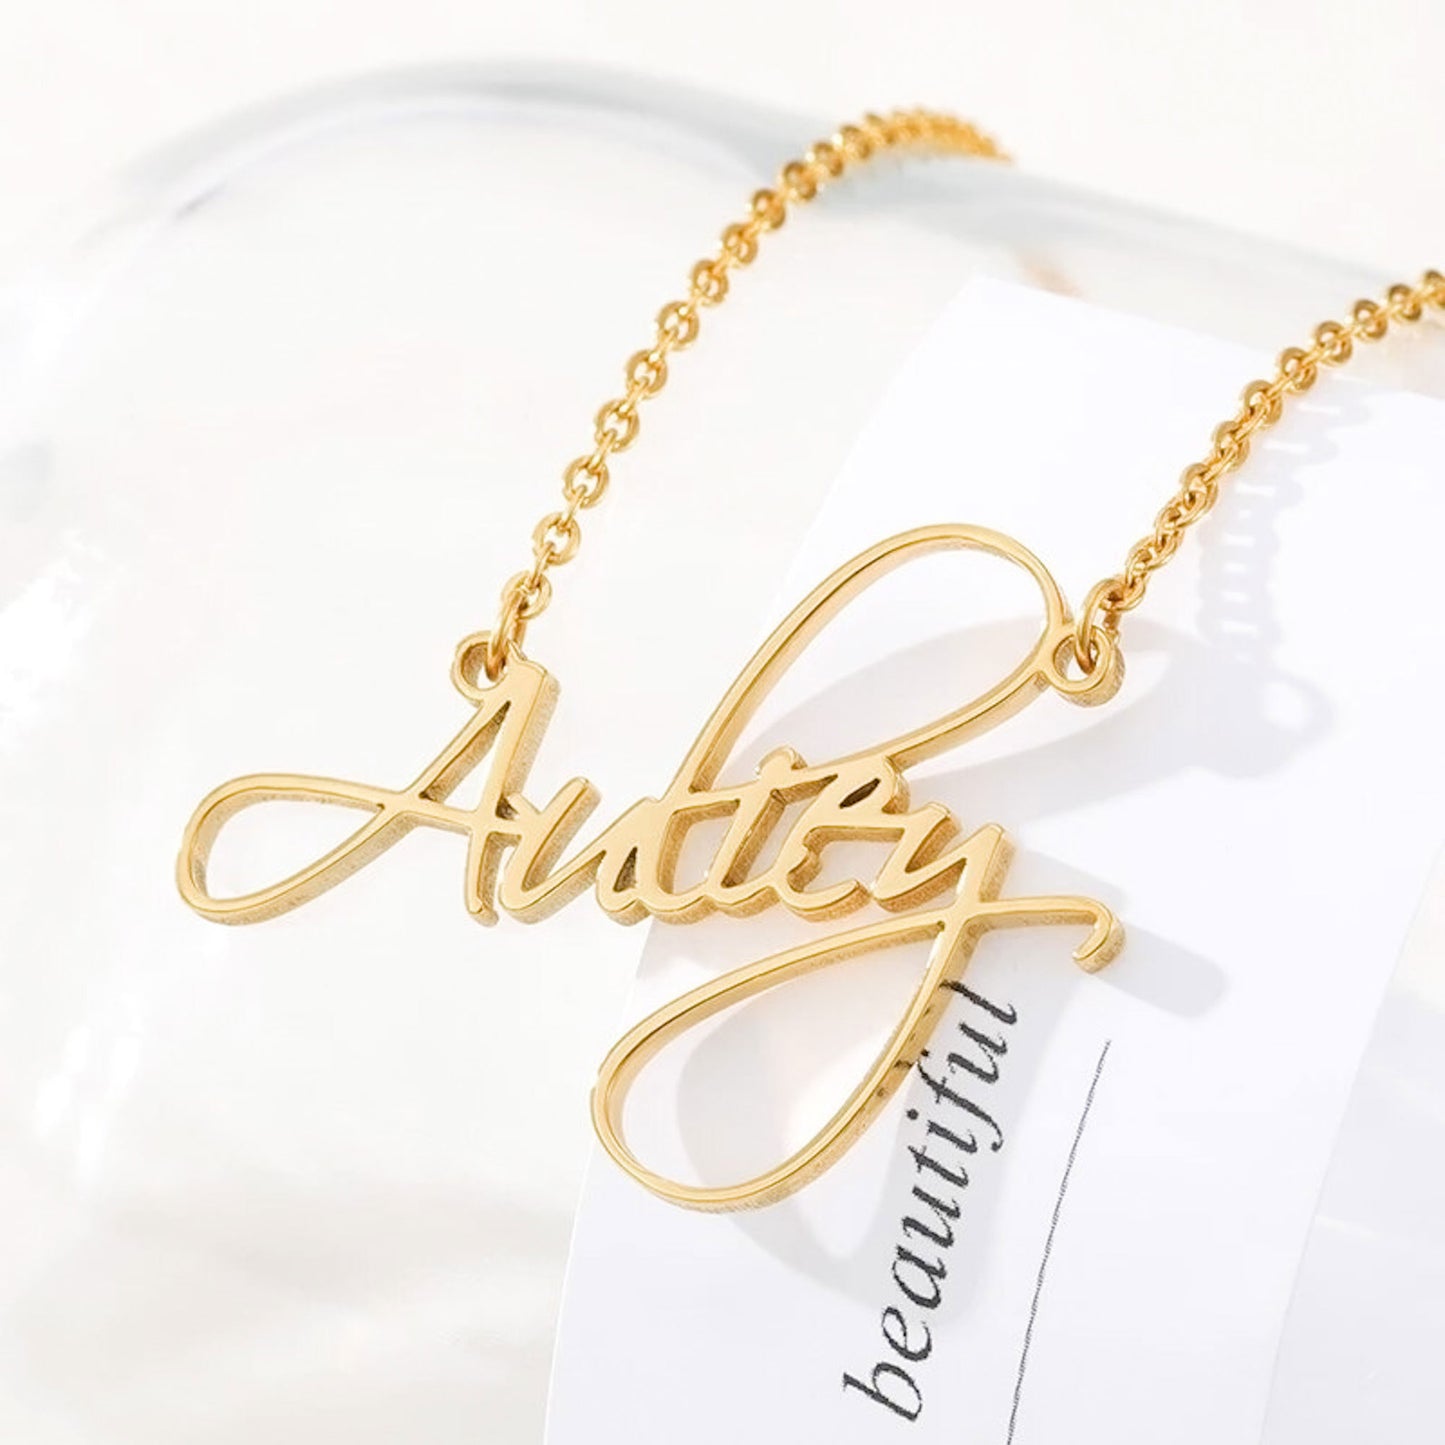 Styled view of gold link chain with a custom-made script name necklace from CustomNameJewelry.com.